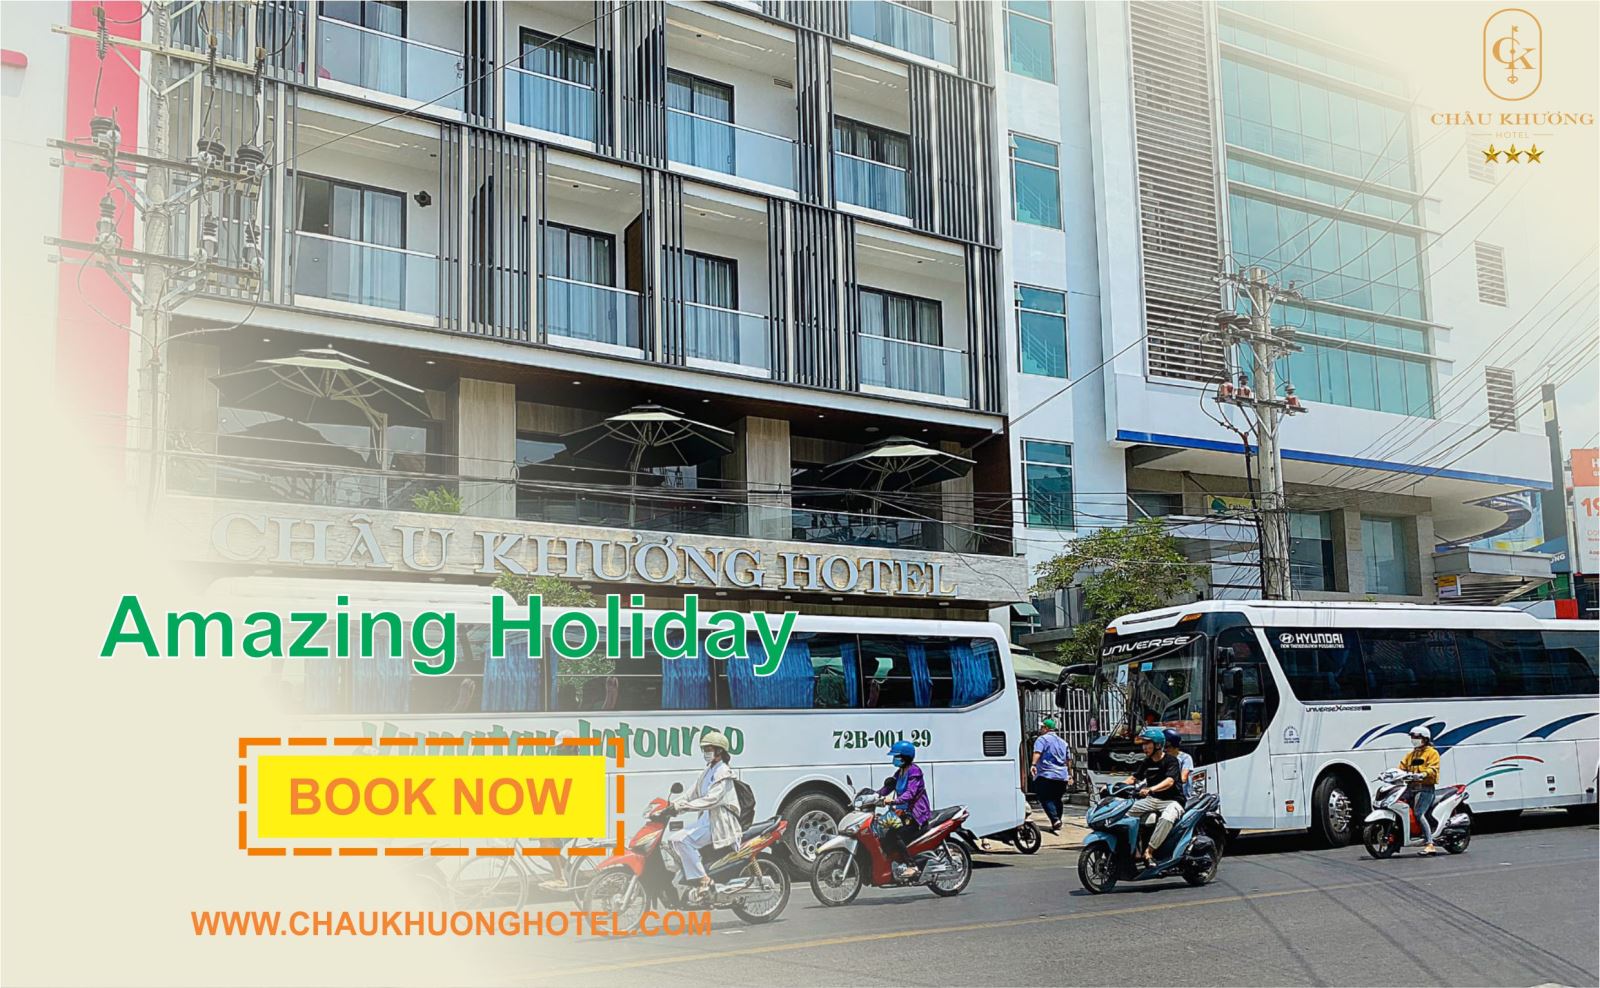 The Hotel is near An Giang University,